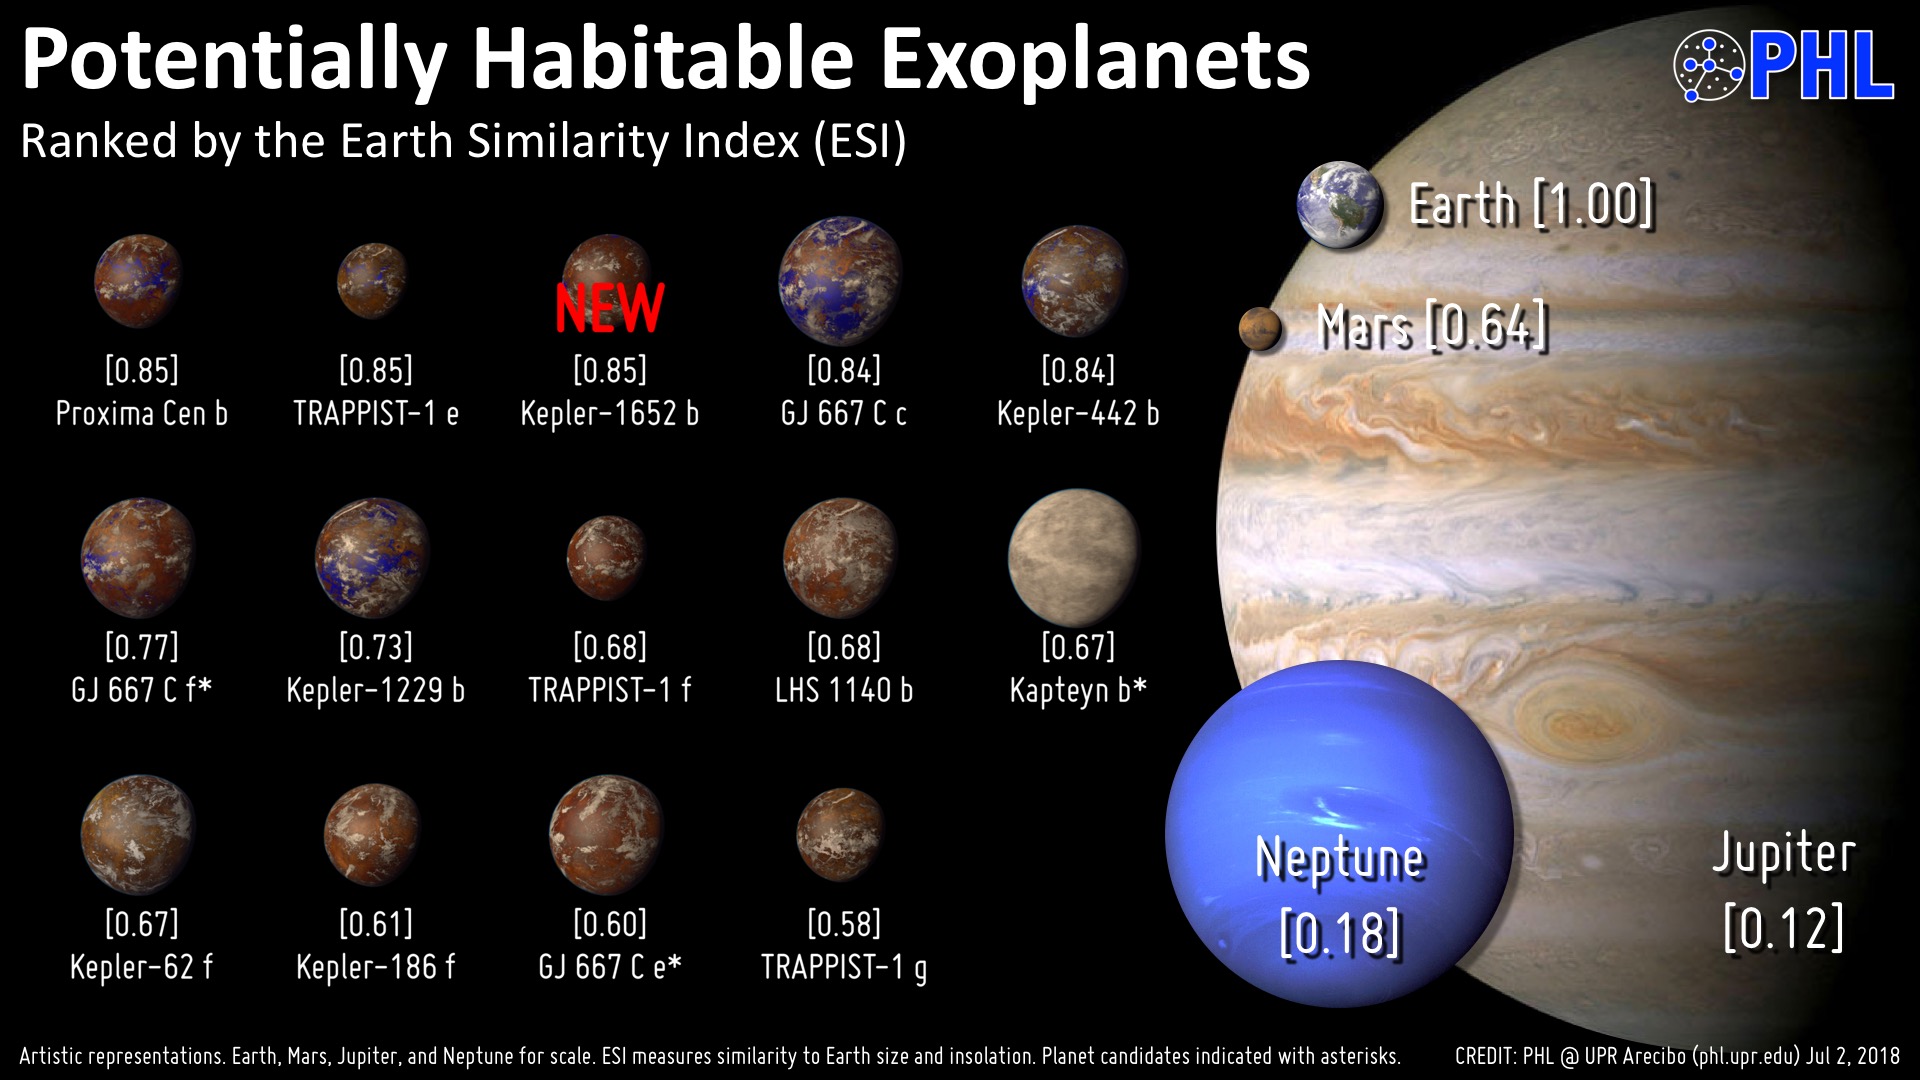 Exoplanets (planets around other stars) ranked by researchers at the  Planetary Habitability Lab at